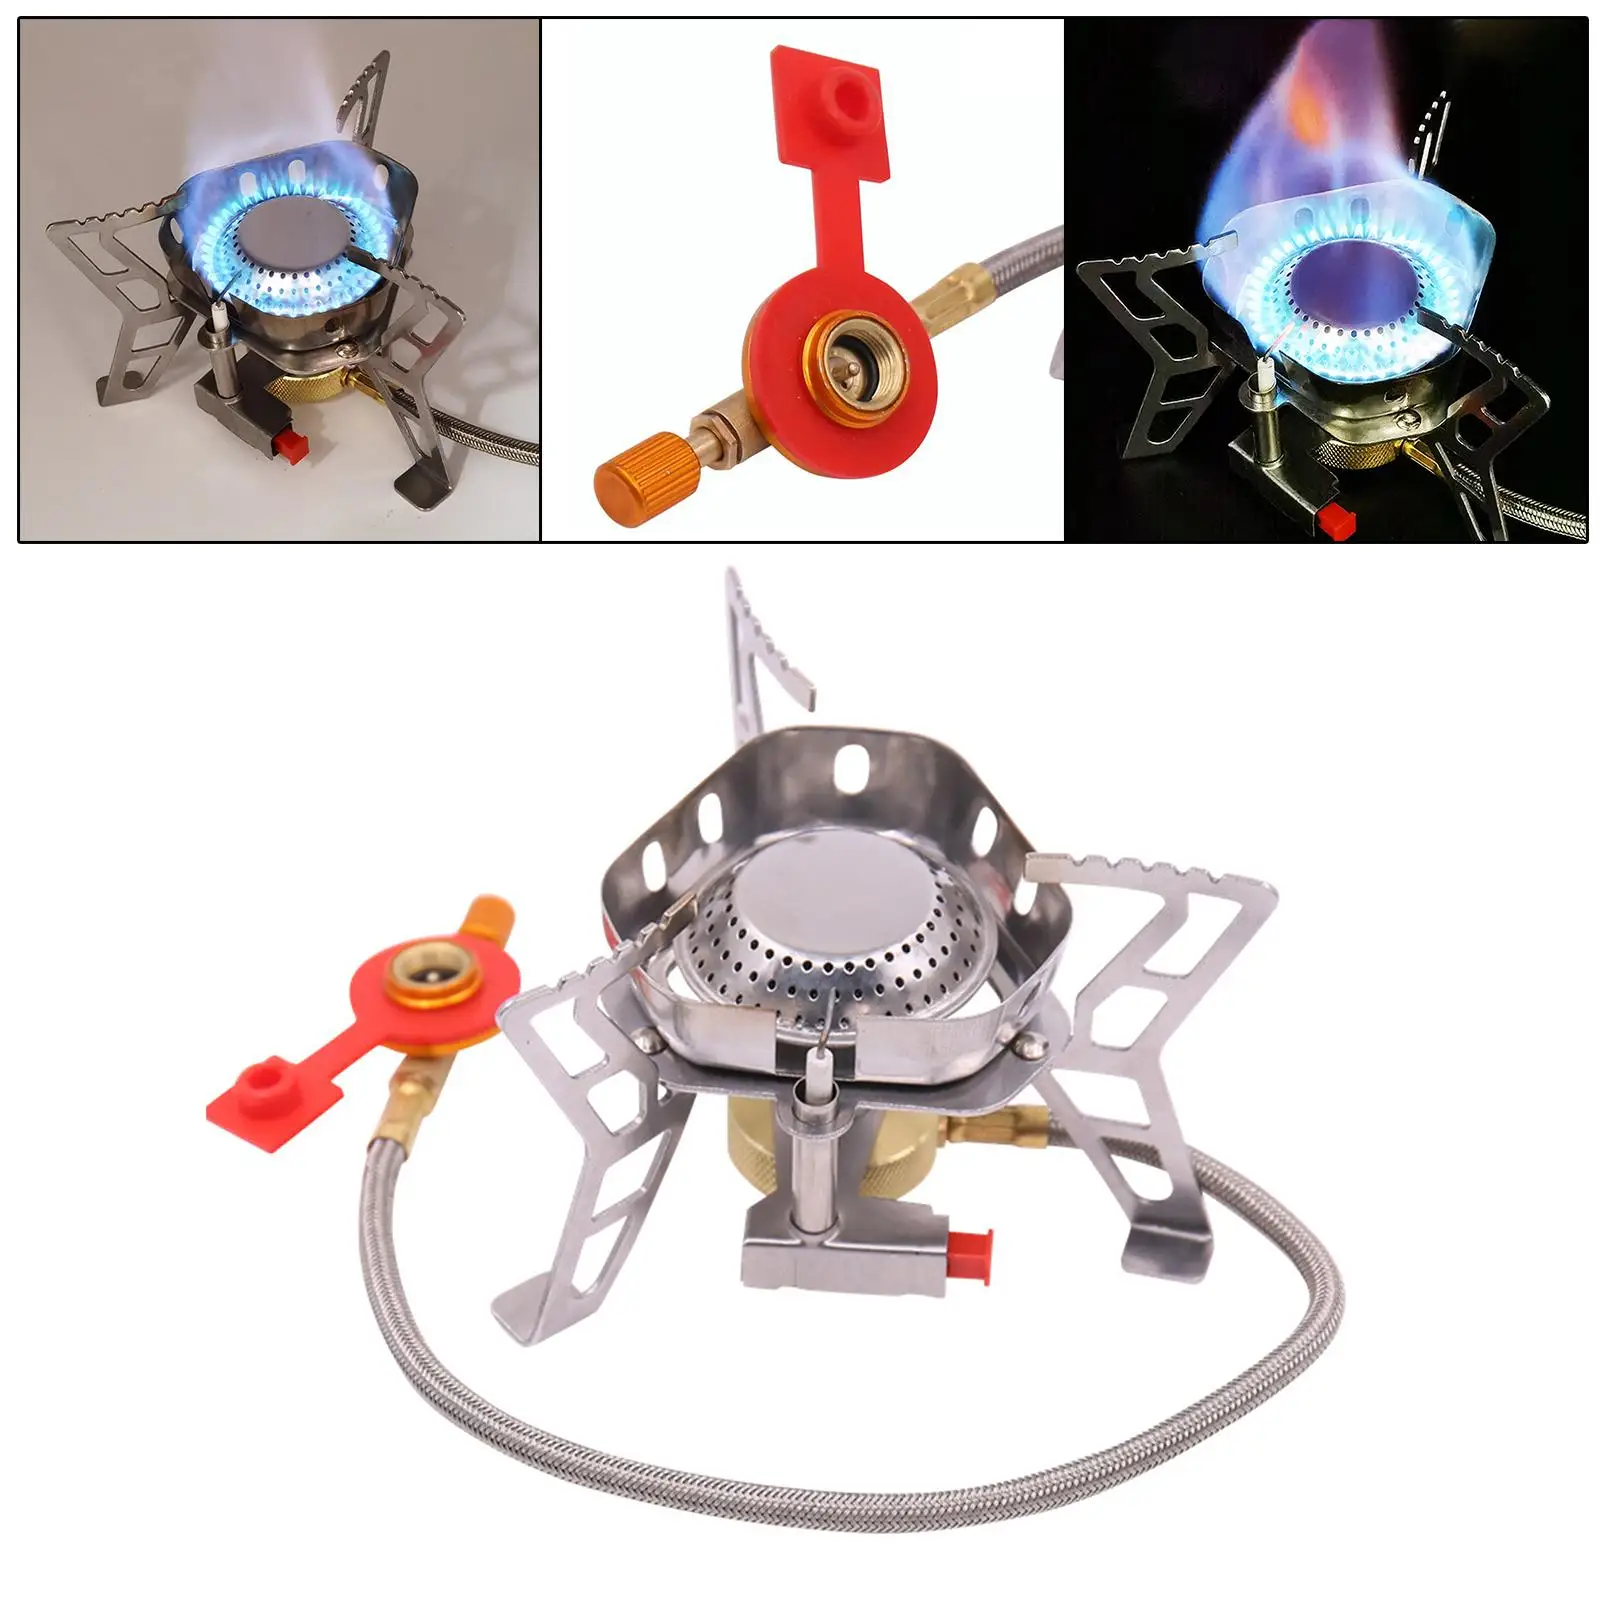 3600W Camping Stove with Storage Case Portable Ultralight Camp Stove Outdoor Stove Burner Windproof for Traveling Hiking Fishing